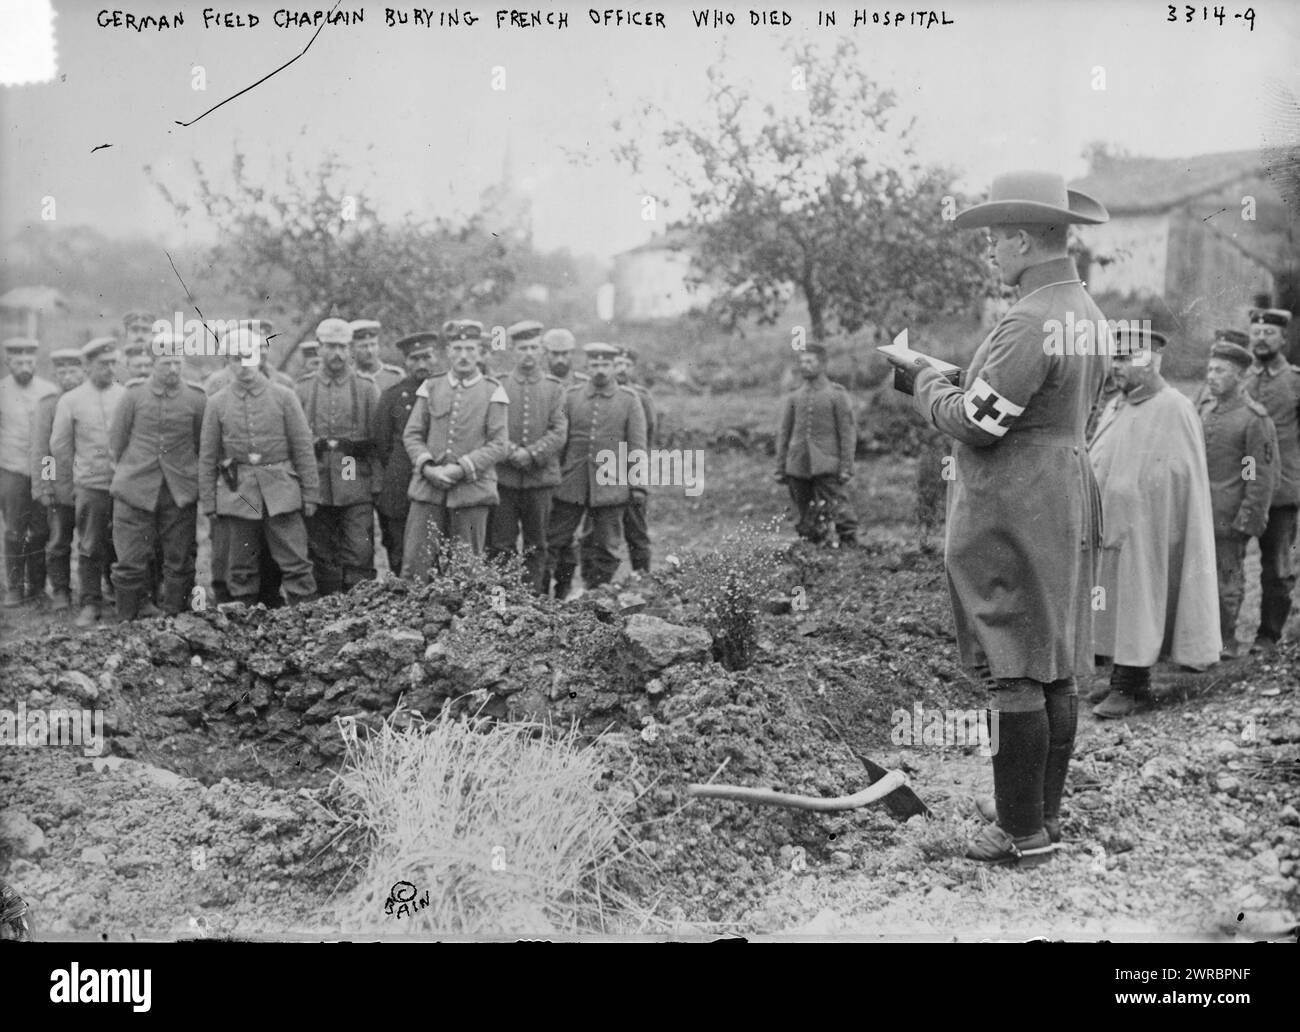 German Field chaplain burying French Officer who died in hospital, Photograph shows German chaplain standing next to a grave with other men, during World War I., 1914, World War, 1914-1918, Glass negatives, 1 negative: glass Stock Photo